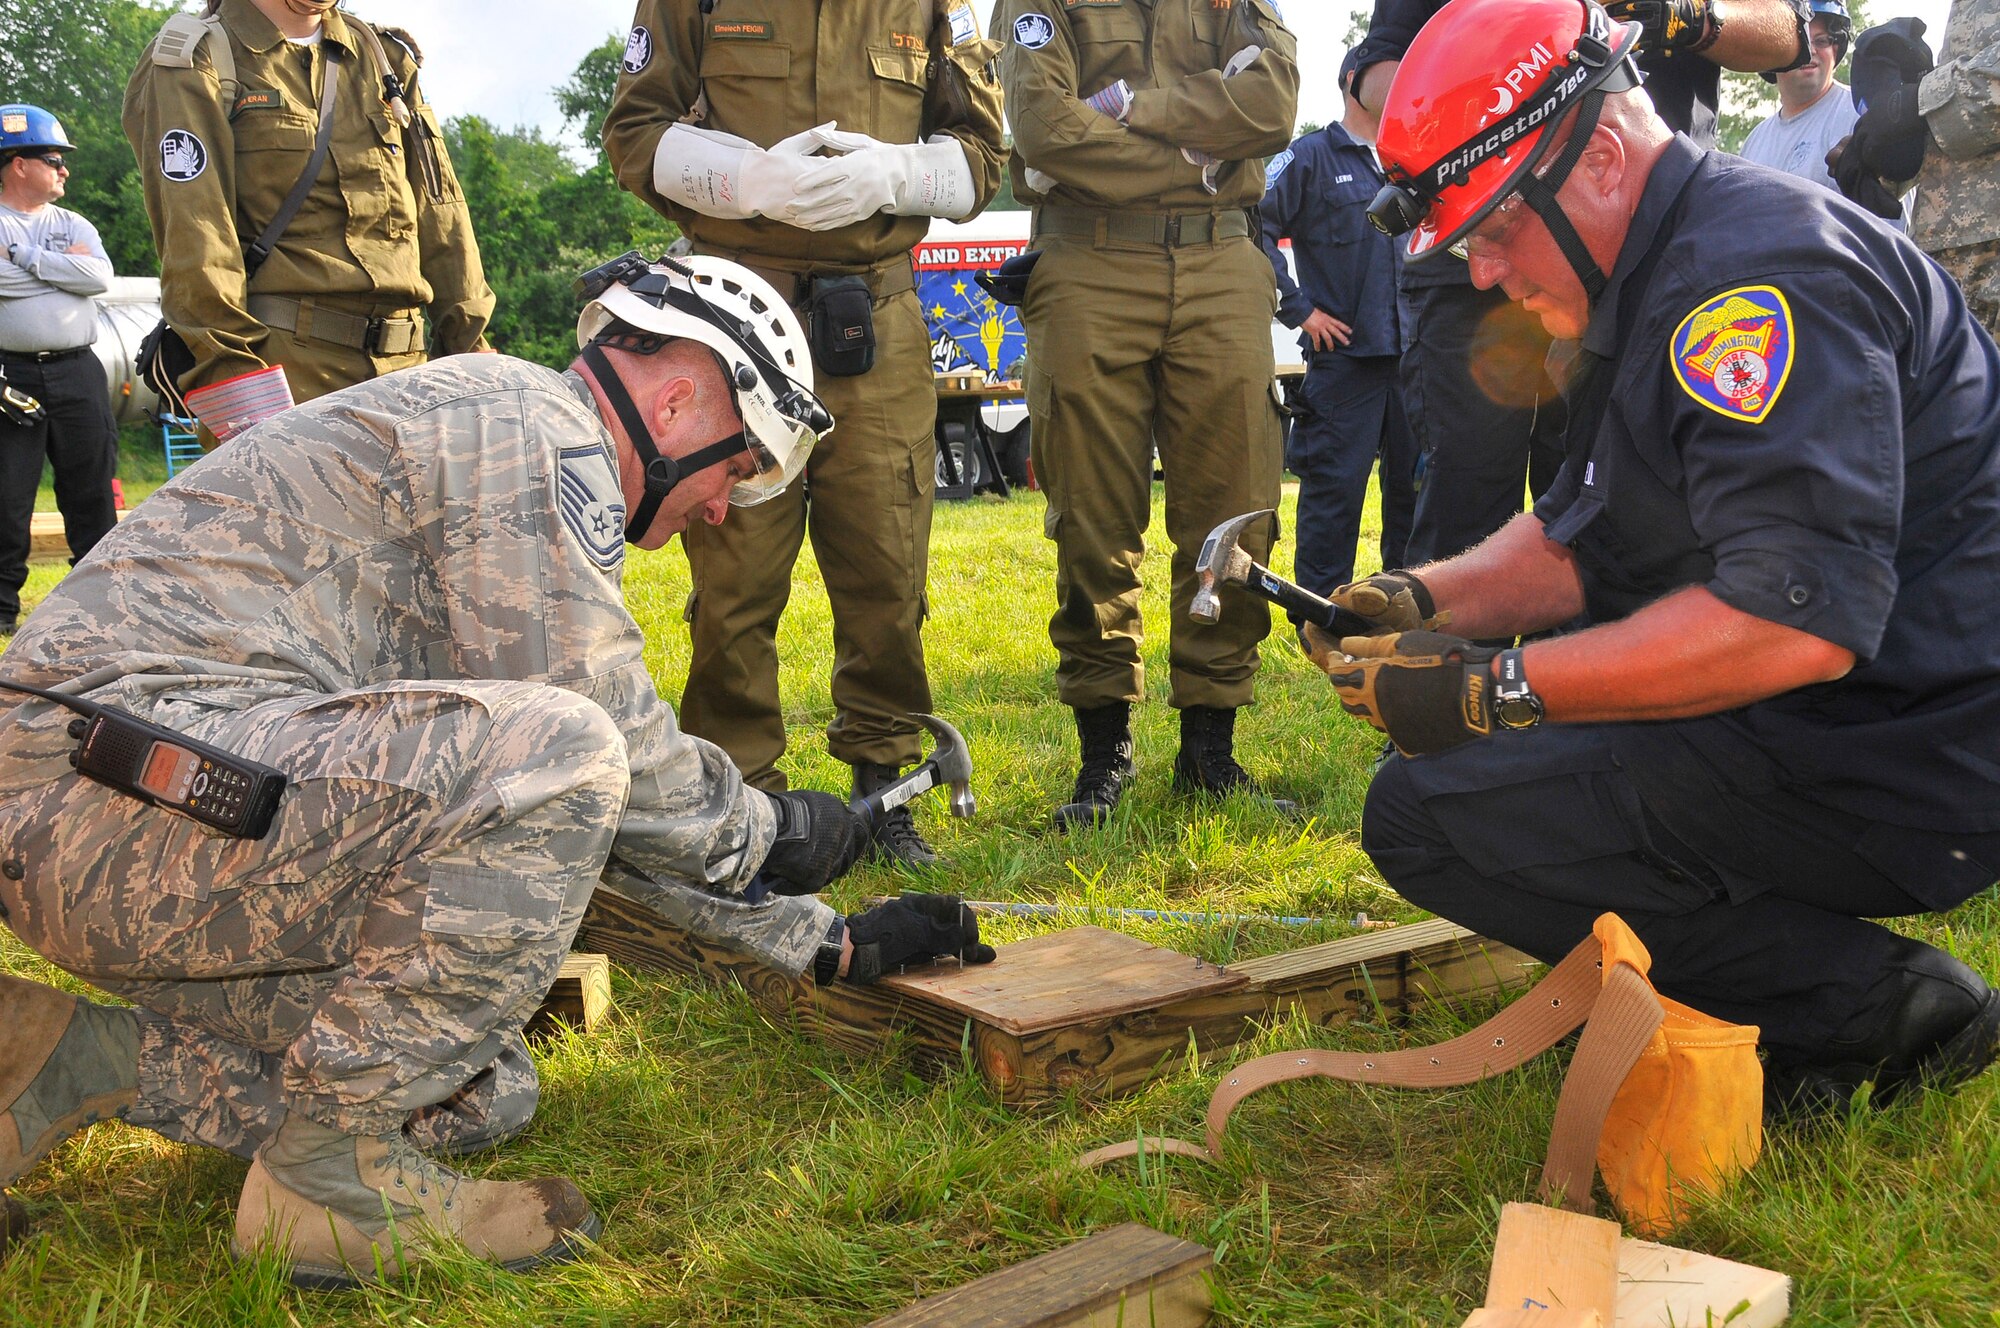 Air Force Master Sgt. Sean S. Fretwell, 181st Intelligence Wing, 19th CERFP, together with a Bloomington fire fighter, constructs a wall brace to support an entrance to a building at Camp Atterbury, Edinburgh, Ind., June 10, 2013. The training conducted at Camp Atterbury involved Air and Army Guardsmen, Bloomington Fire Department and Israelis Search and Rescue team in an exercise called United Front II. (U.S. Air National Guard photo by Senior Master Sgt. John S. Chapman/Released)